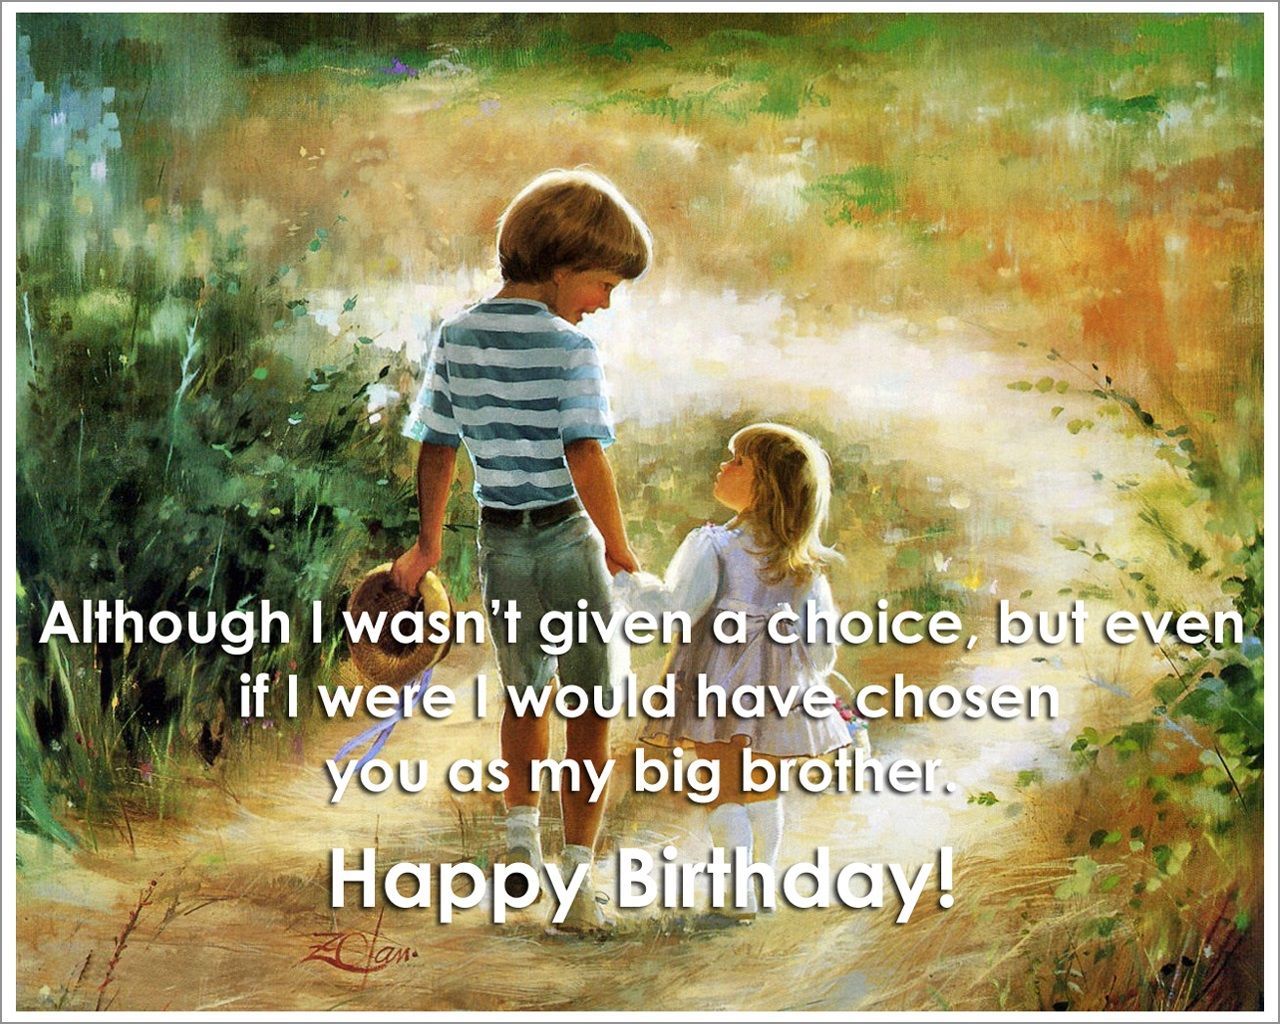 Get Free Happy Birthday Quotes for Brother Image, Photo, Pics